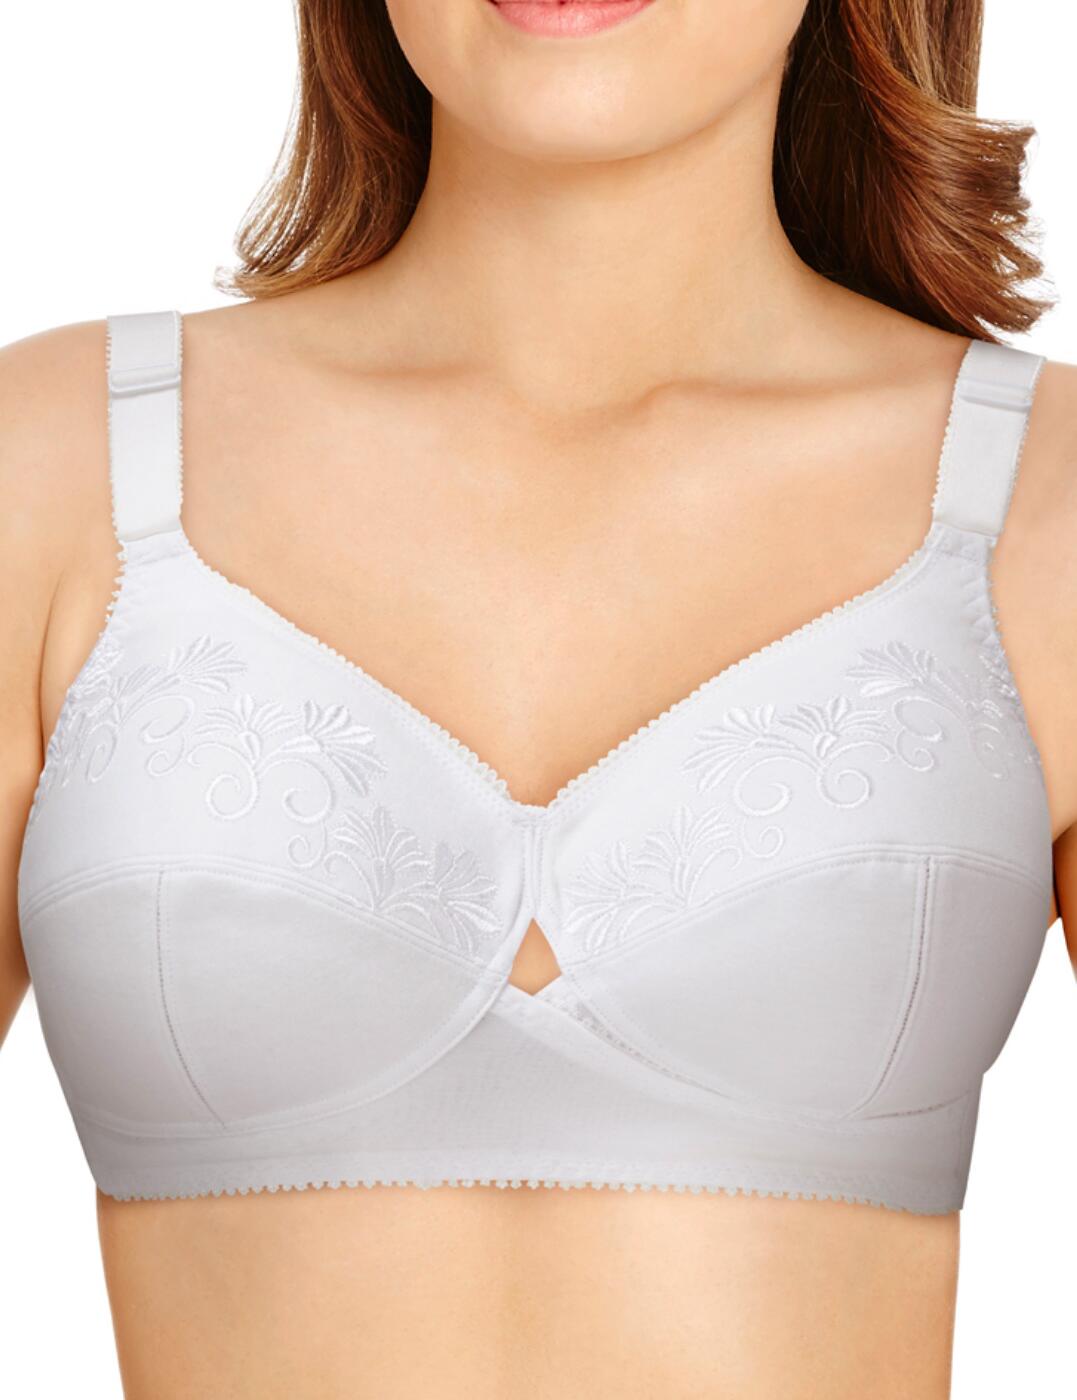 Berlei Total Support Cotton Non-Wired Bra B518 Womens Full Cup Everyday Bras